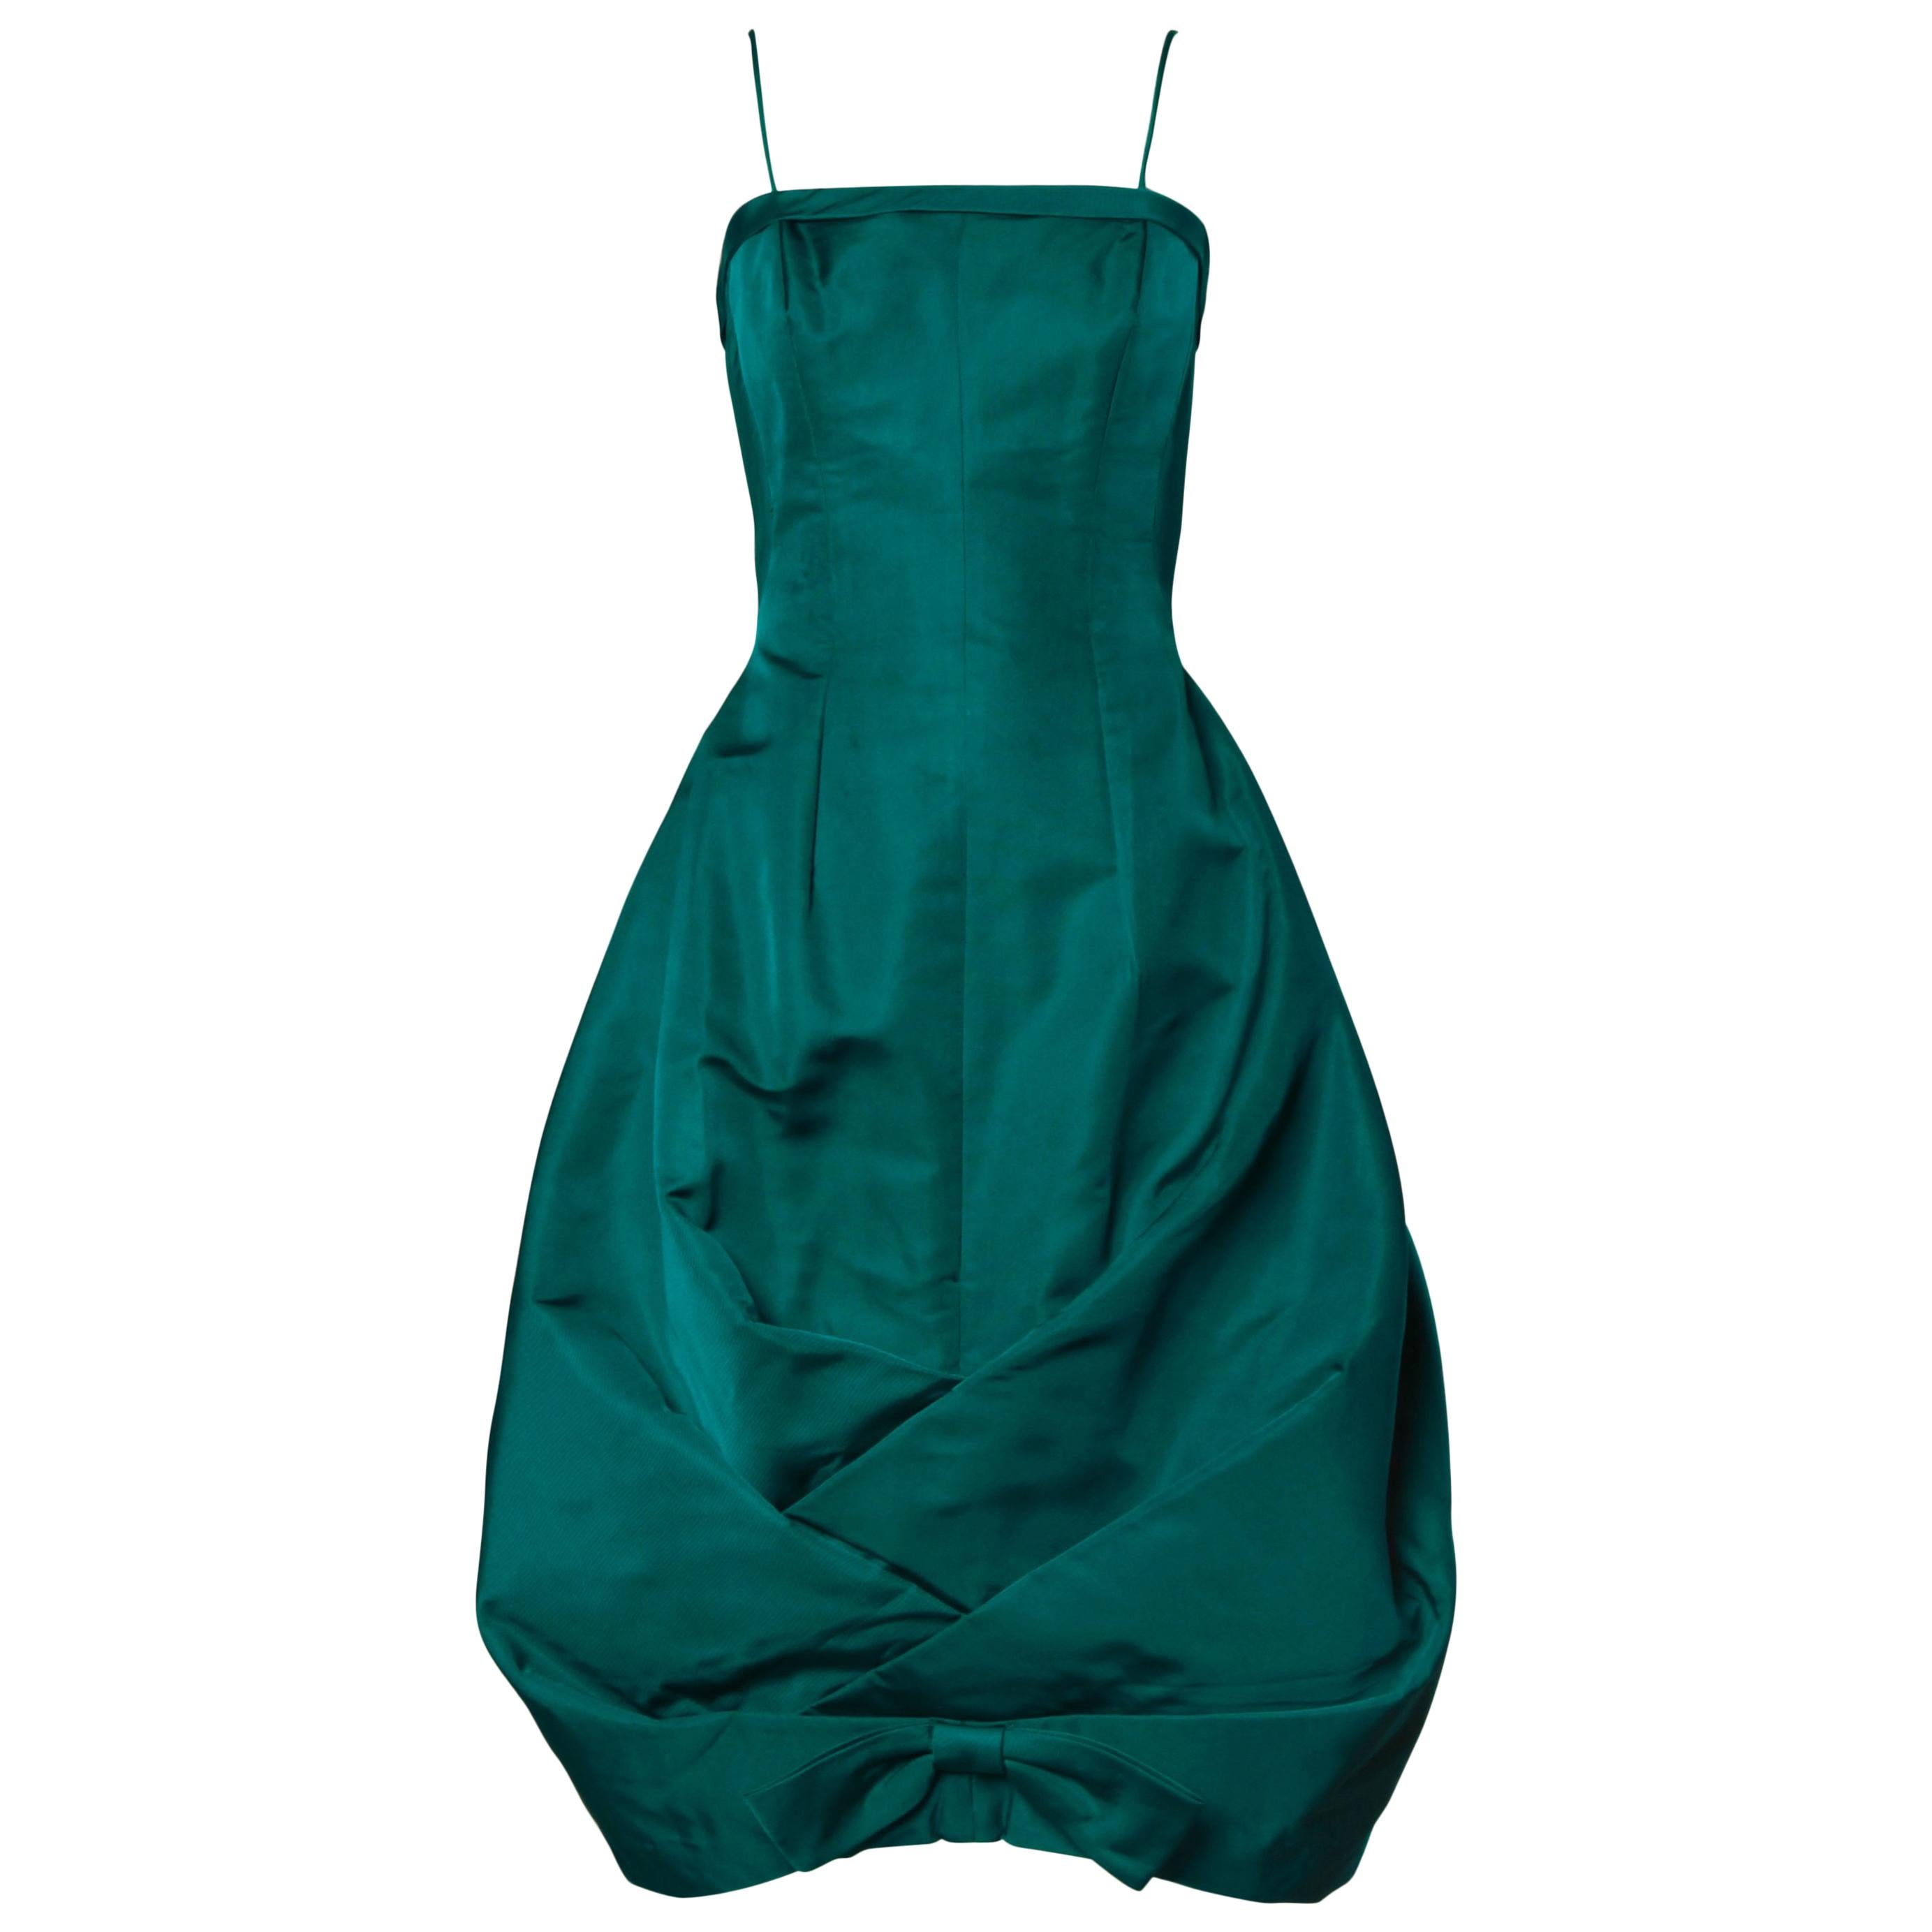 1950s Suzy Perette Vintage Green Silk Cocktail Dress with an Origami Bubble Hem